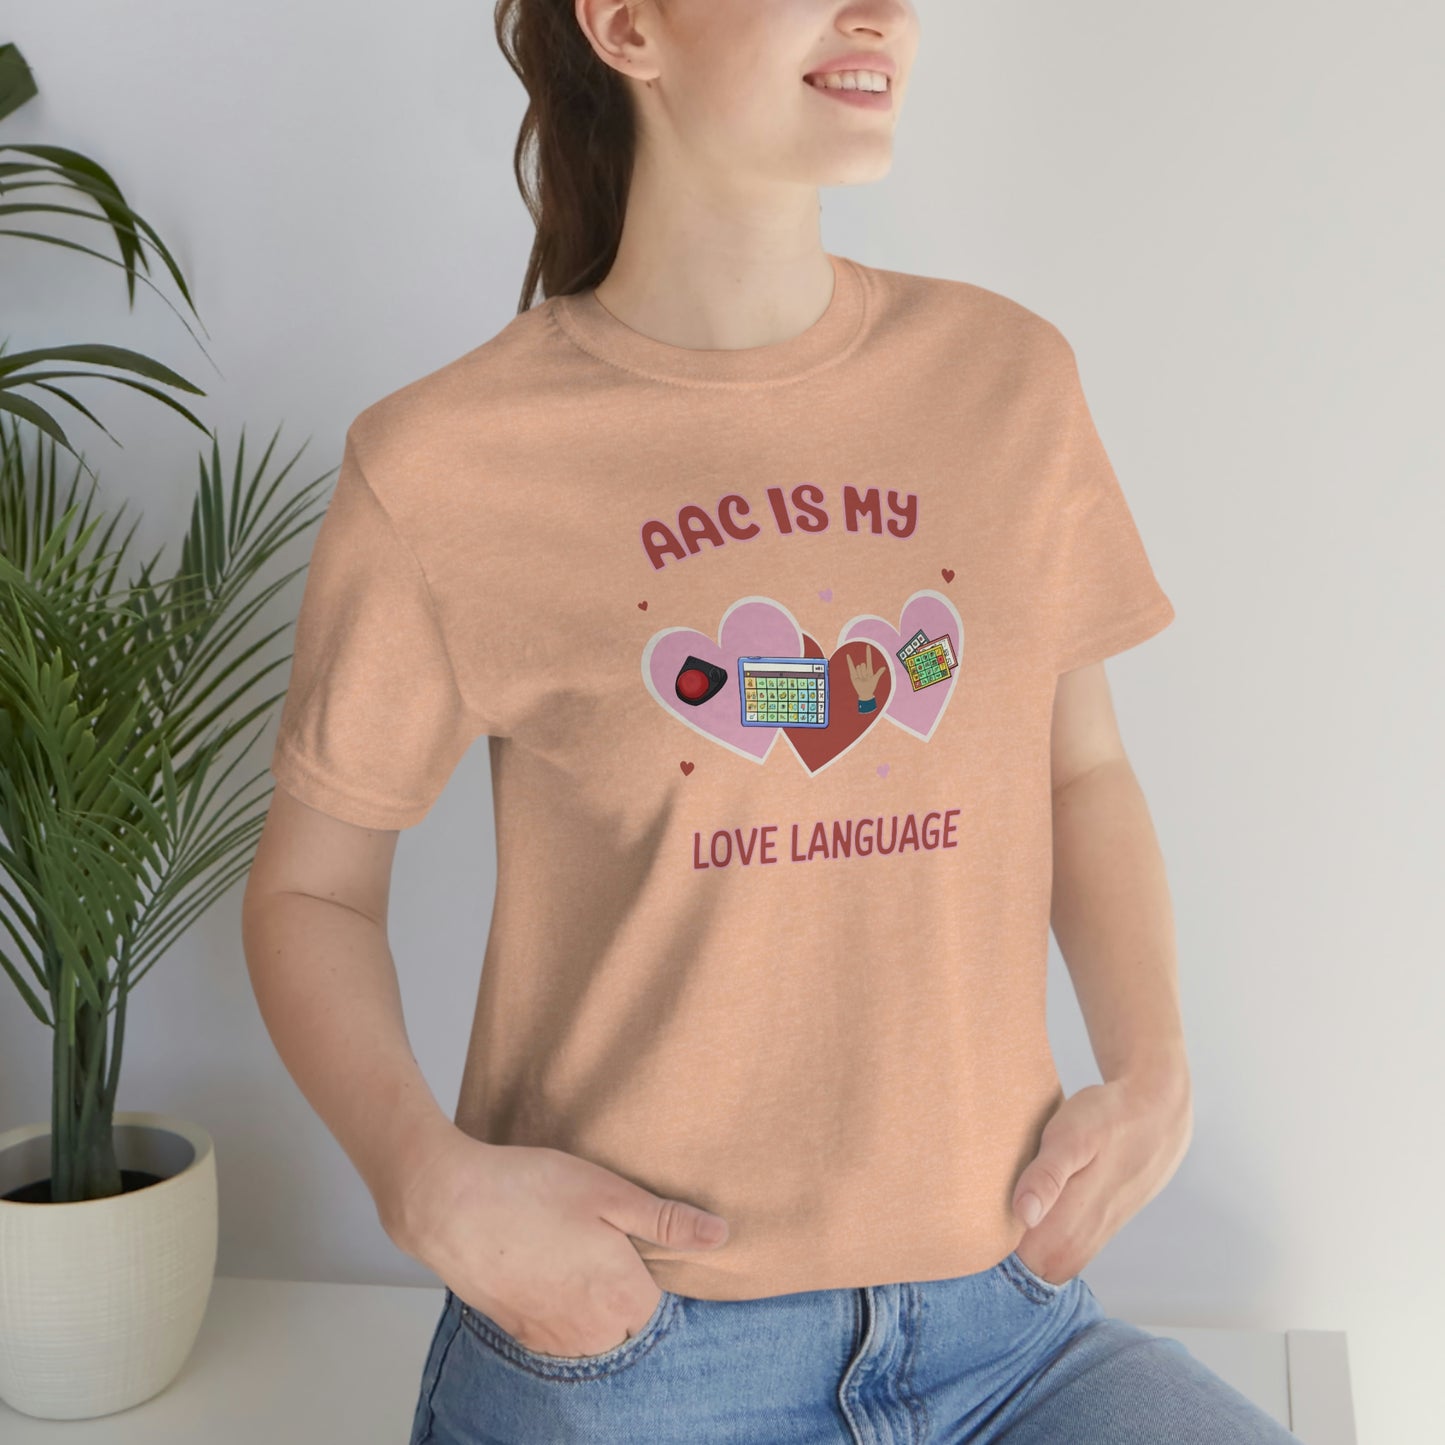 Valentine's Day AAC is My Love Language Tee Shirt for the SLP, SLPA, Educator, and Communication Champion